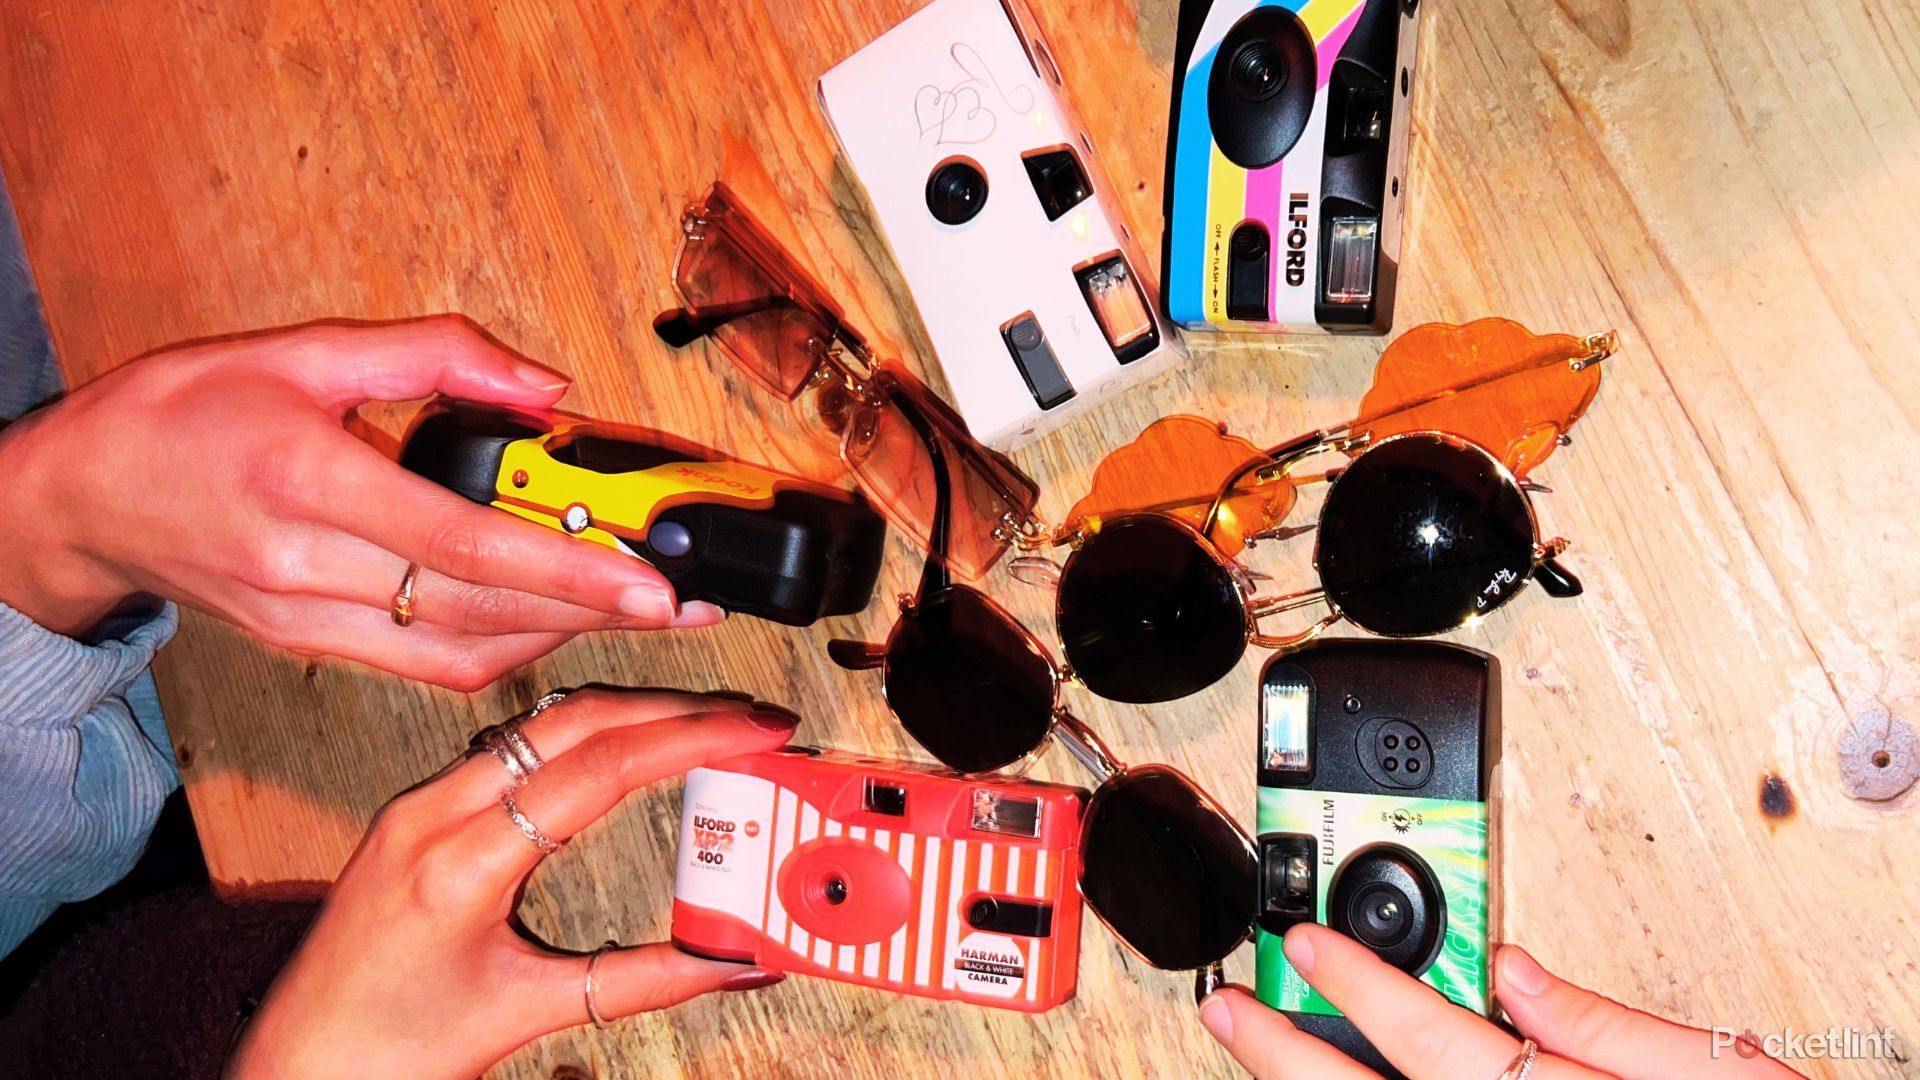 I put Amazon's top disposable cameras to the test on a night out